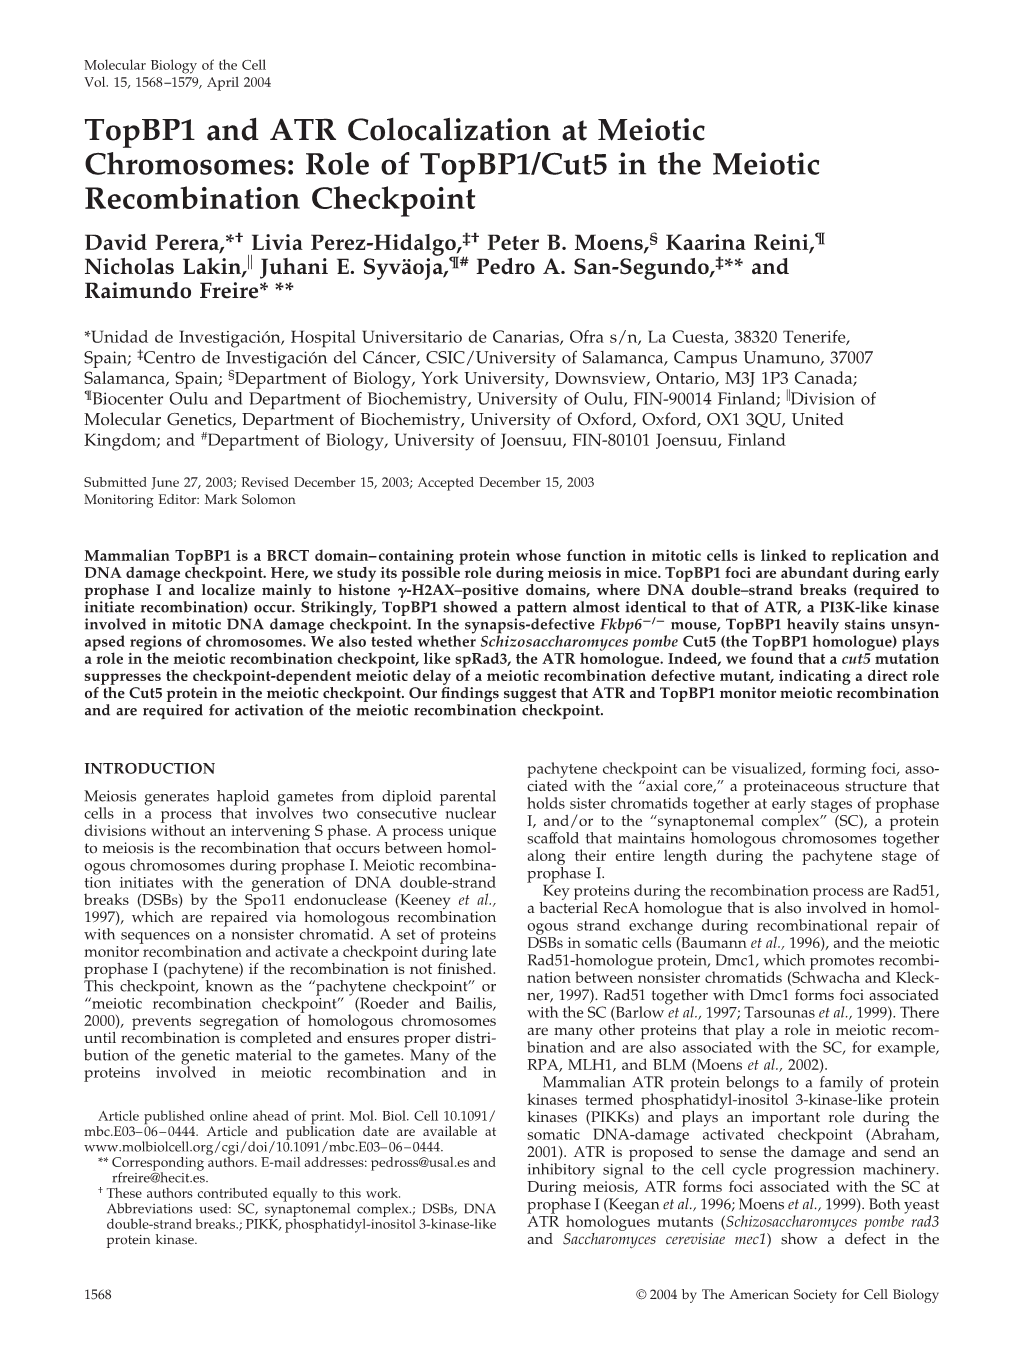 Topbp1 and ATR Colocalization at Meiotic Chromosomes: Role of Topbp1/Cut5 in the Meiotic Recombination Checkpoint David Perera,*† Livia Perez-Hidalgo,‡† Peter B